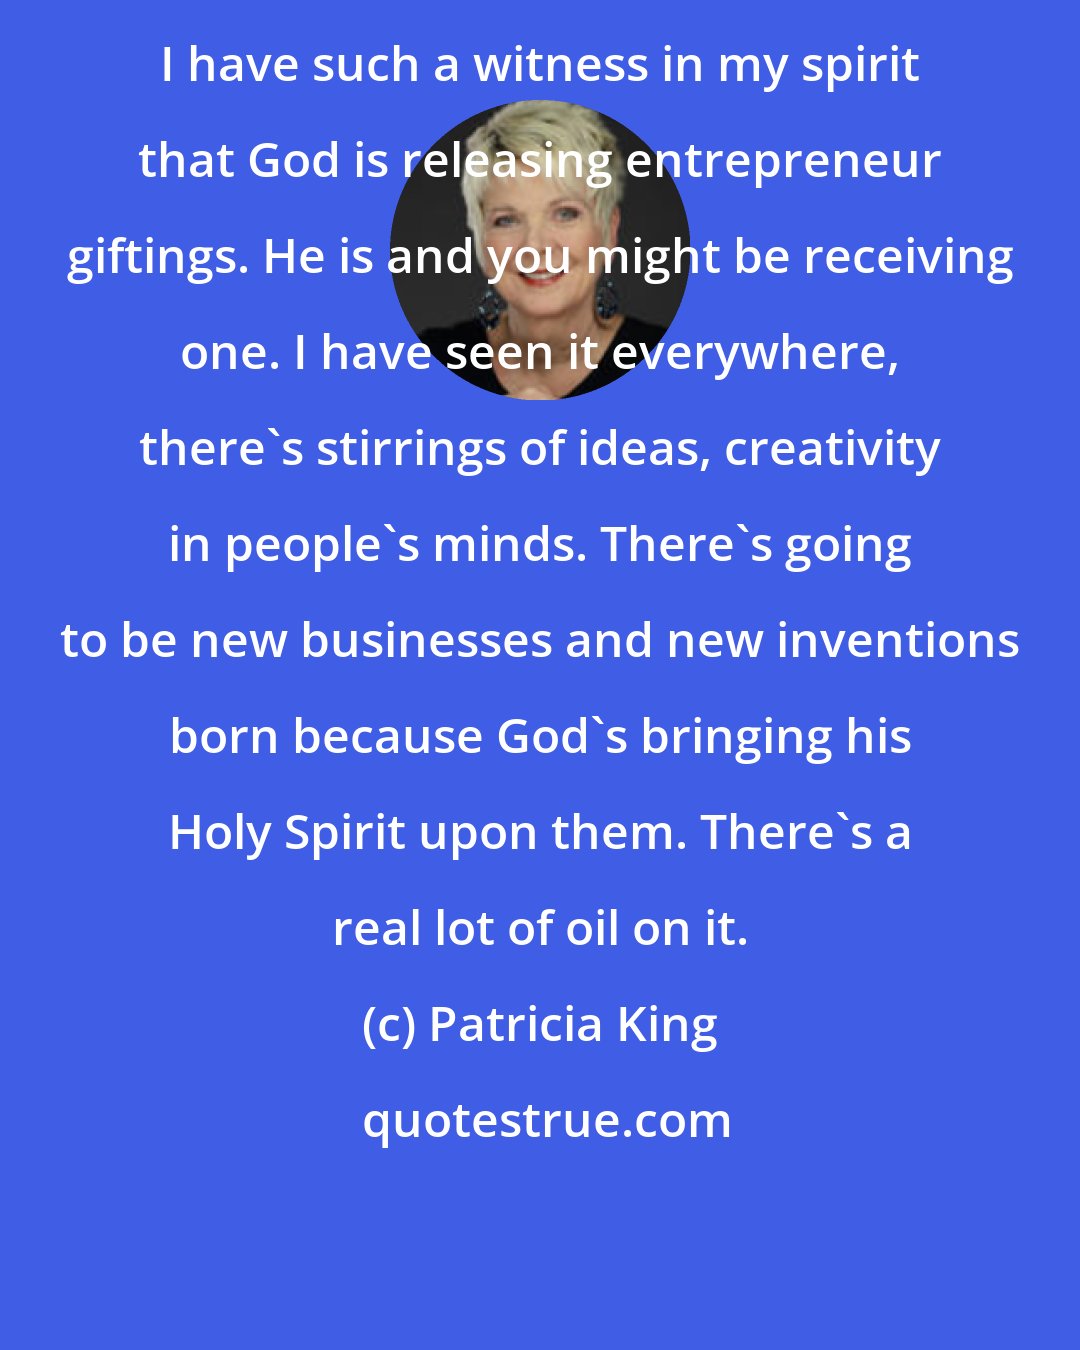 Patricia King: I have such a witness in my spirit that God is releasing entrepreneur giftings. He is and you might be receiving one. I have seen it everywhere, there's stirrings of ideas, creativity in people's minds. There's going to be new businesses and new inventions born because God's bringing his Holy Spirit upon them. There's a real lot of oil on it.